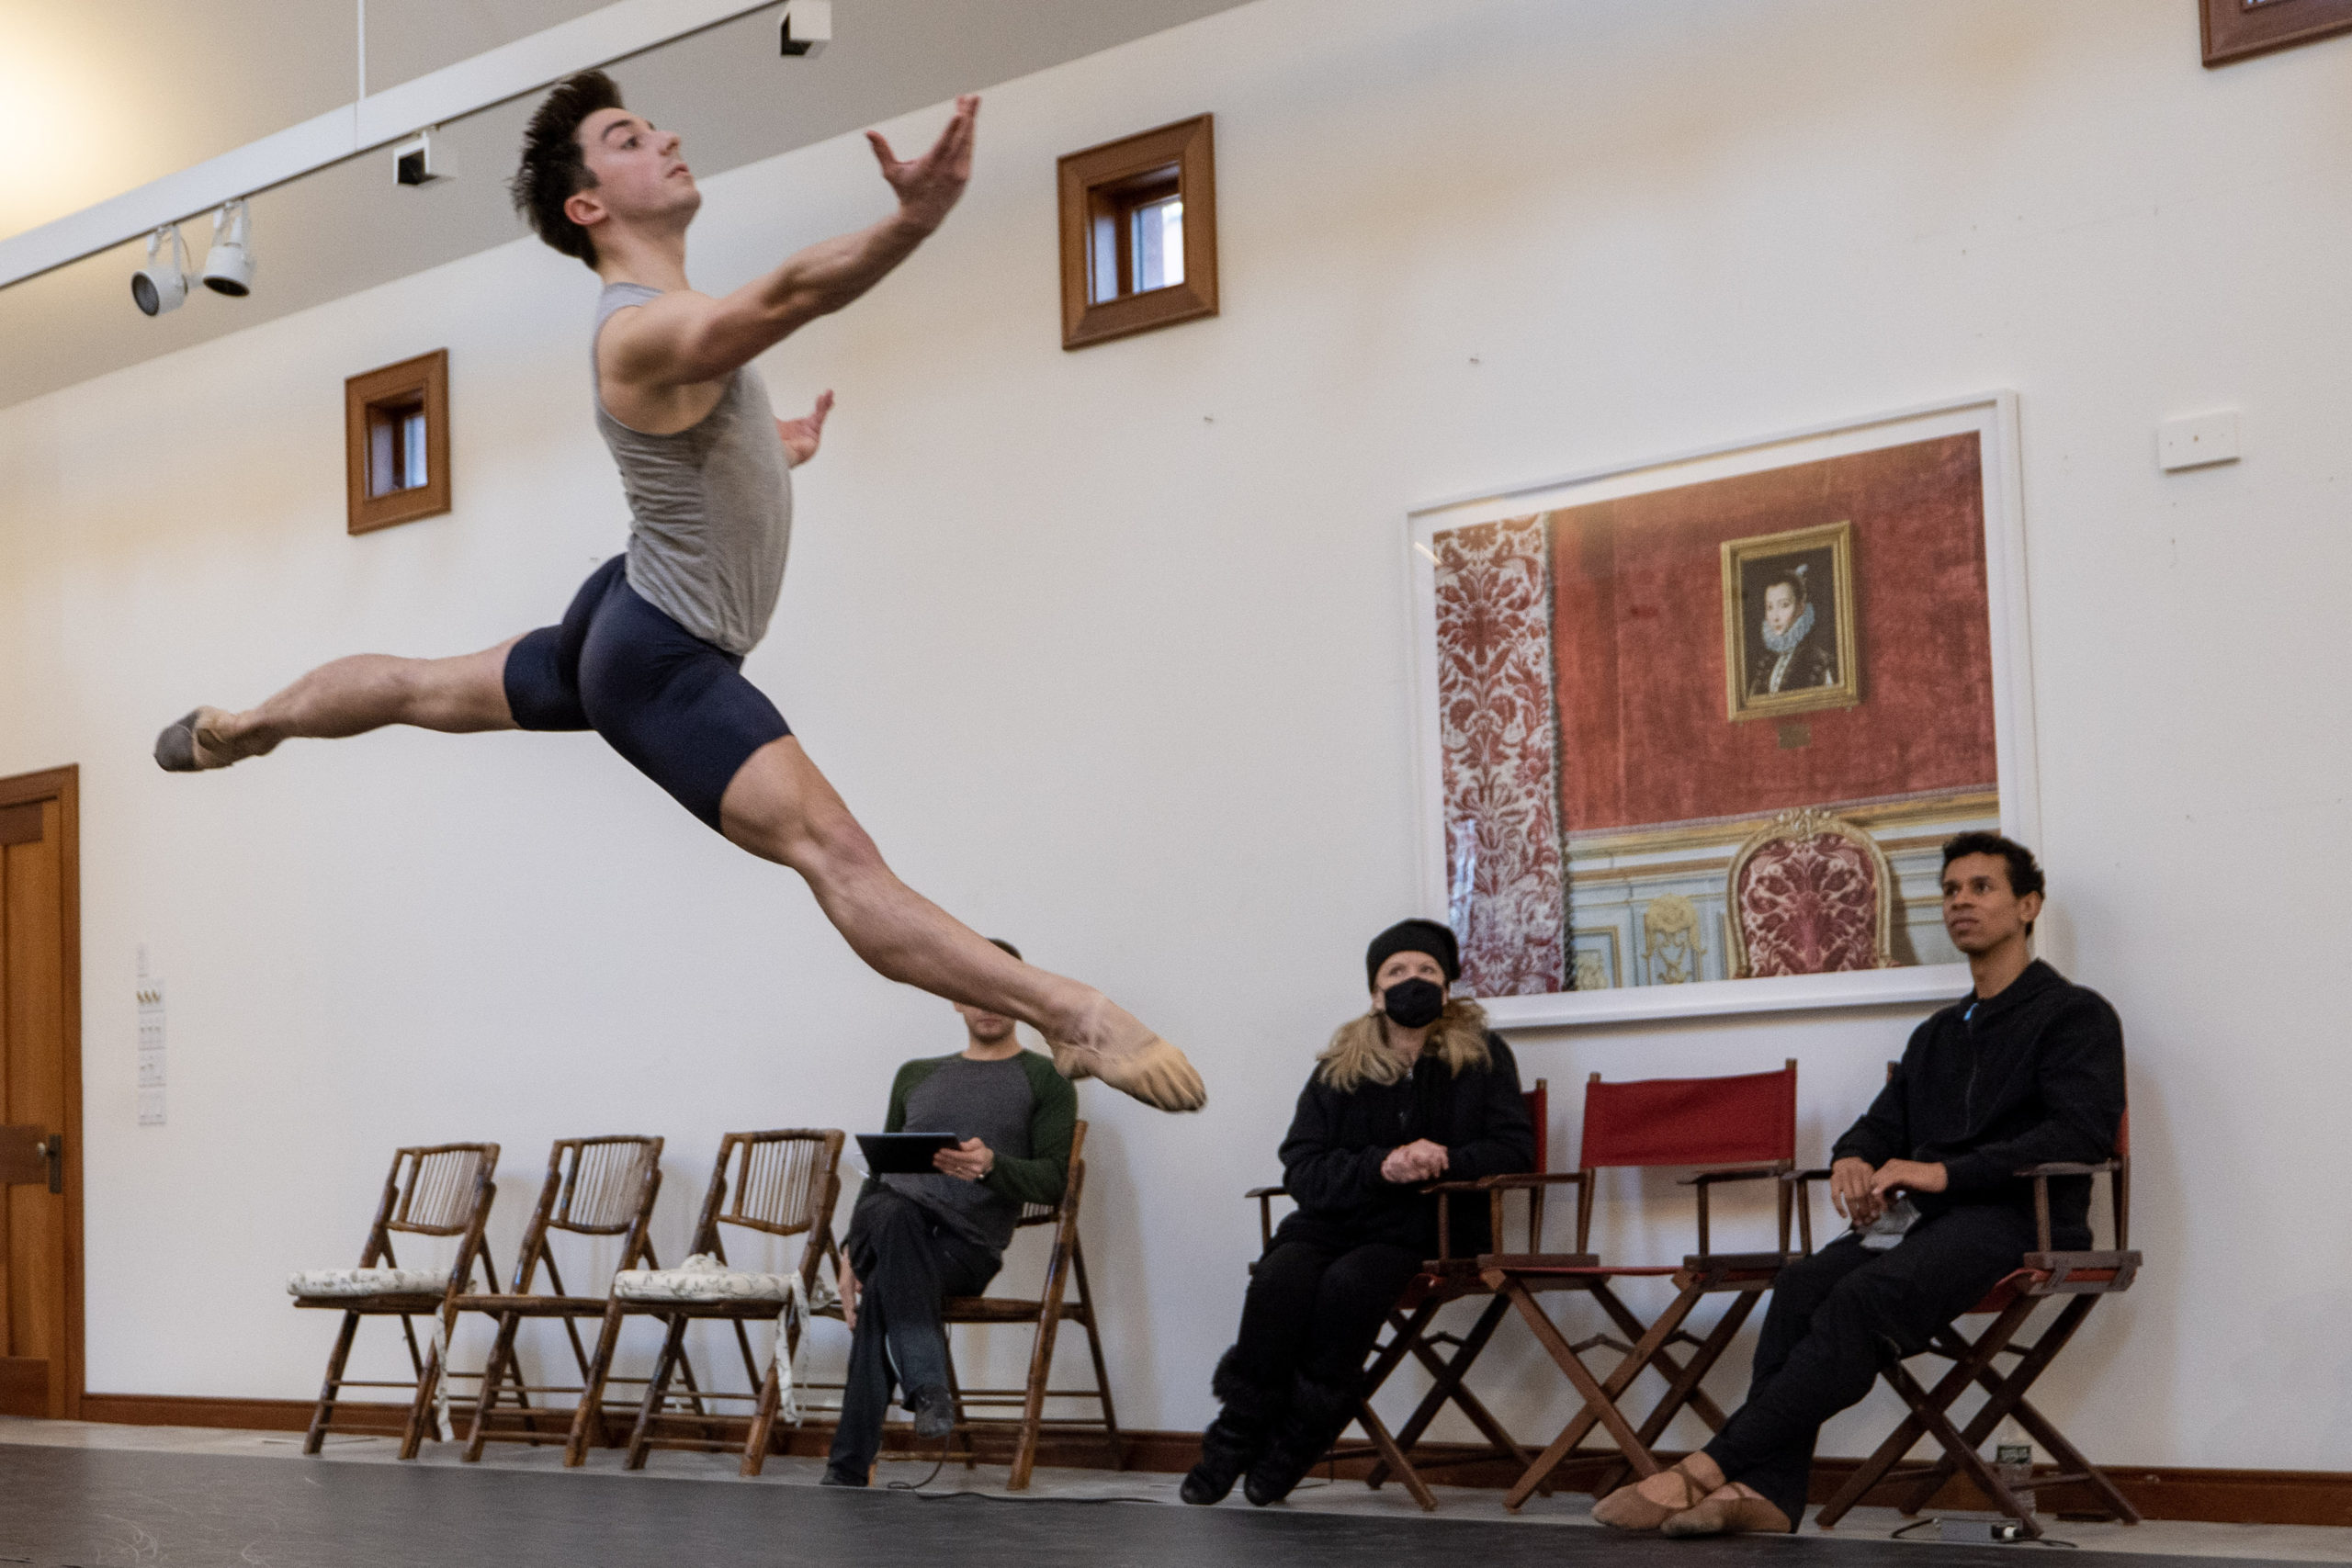 Hamptons Dance Project in rehearsal at the Guild Hall William P. Rayner Artist-in-Residence studio. From left, Craig Salstein, Lauren Bonfiglio, Tyler Maloney and Jose Sebastian. © JOE BRONDO FOR GUILD HALL